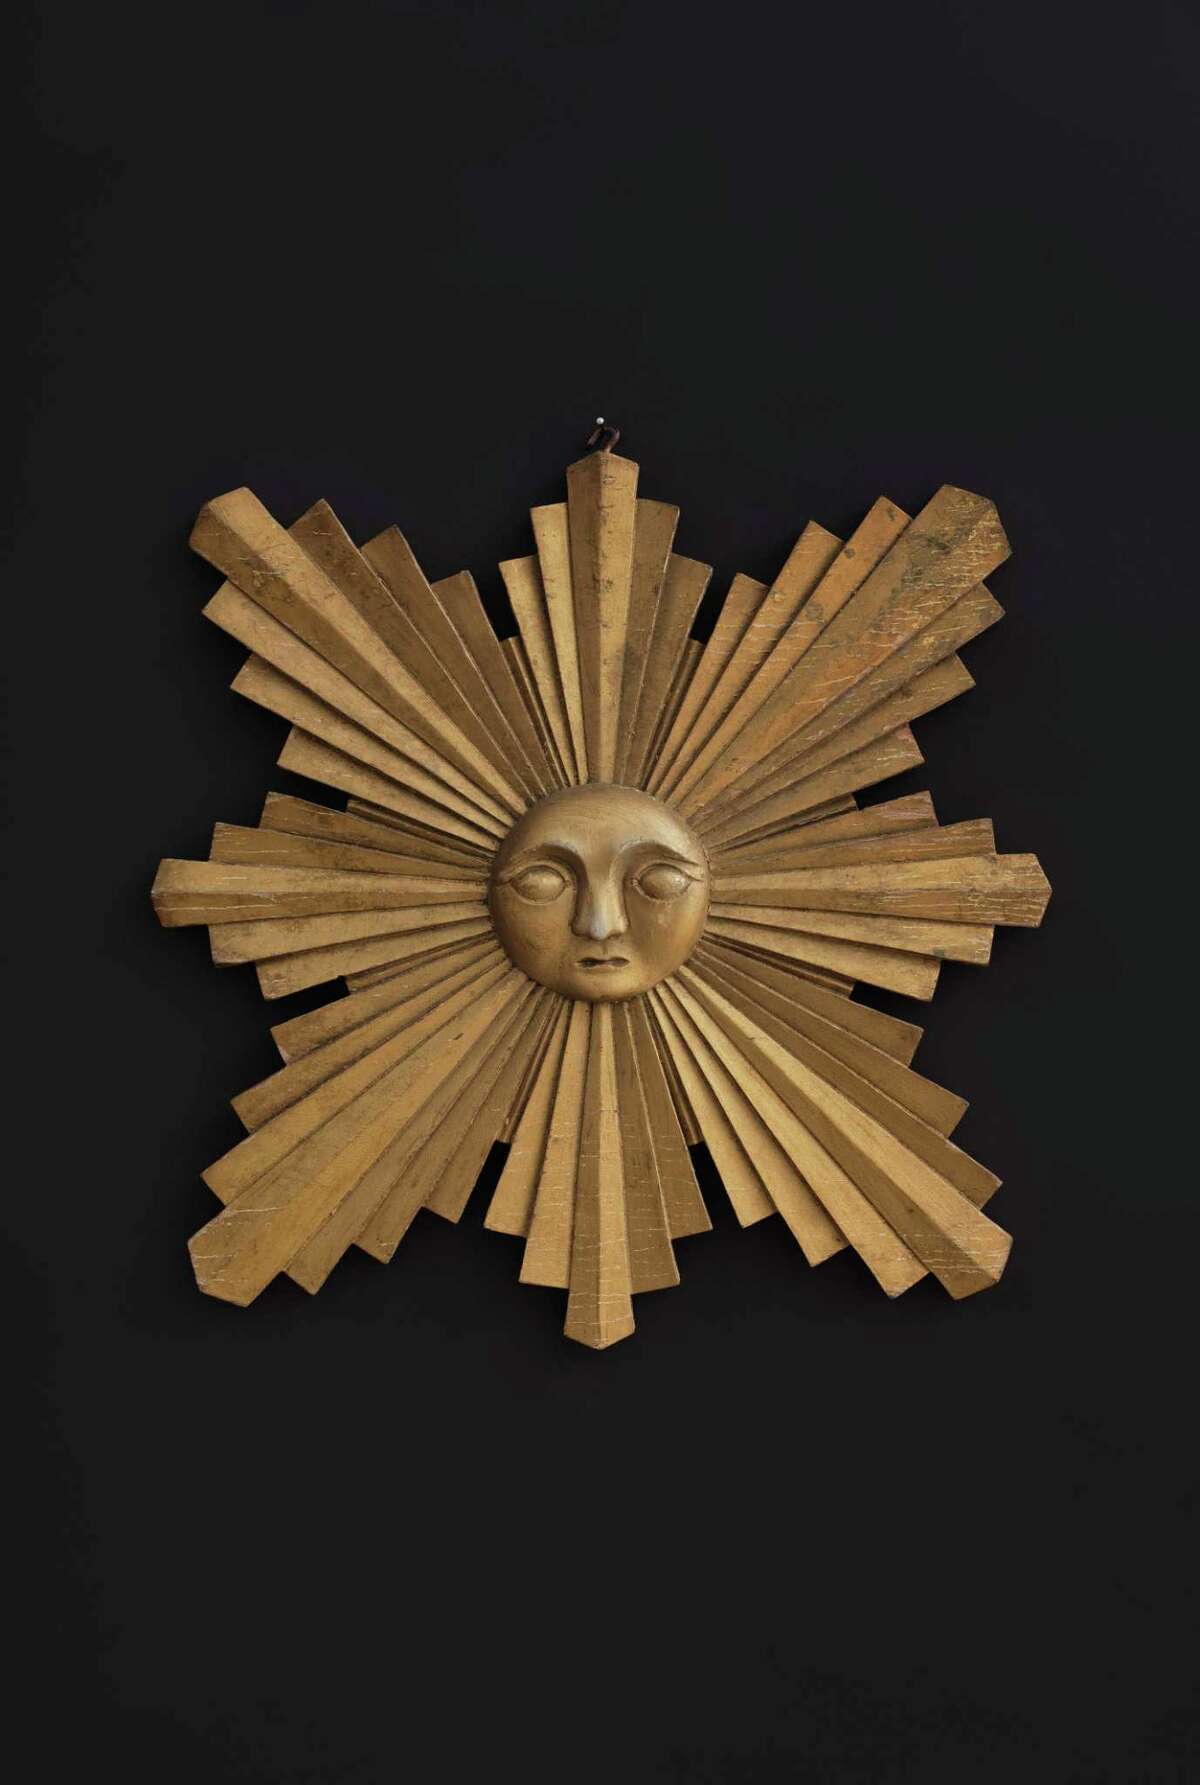 The Mattatuck Museum in Waterbury has announced its art shows for the summer season. Pictured, Mystery & Benevolence: Artist unidentified, Independent Order of Odd Fellows Plaque, United States, 1850-1900, Paint and gold leaf on wood, 16 x 15 x 1-1/2 in., Collection American Folk Art Museum, New York, Gift of Kendra and Allan Daniel, 2015.1.19